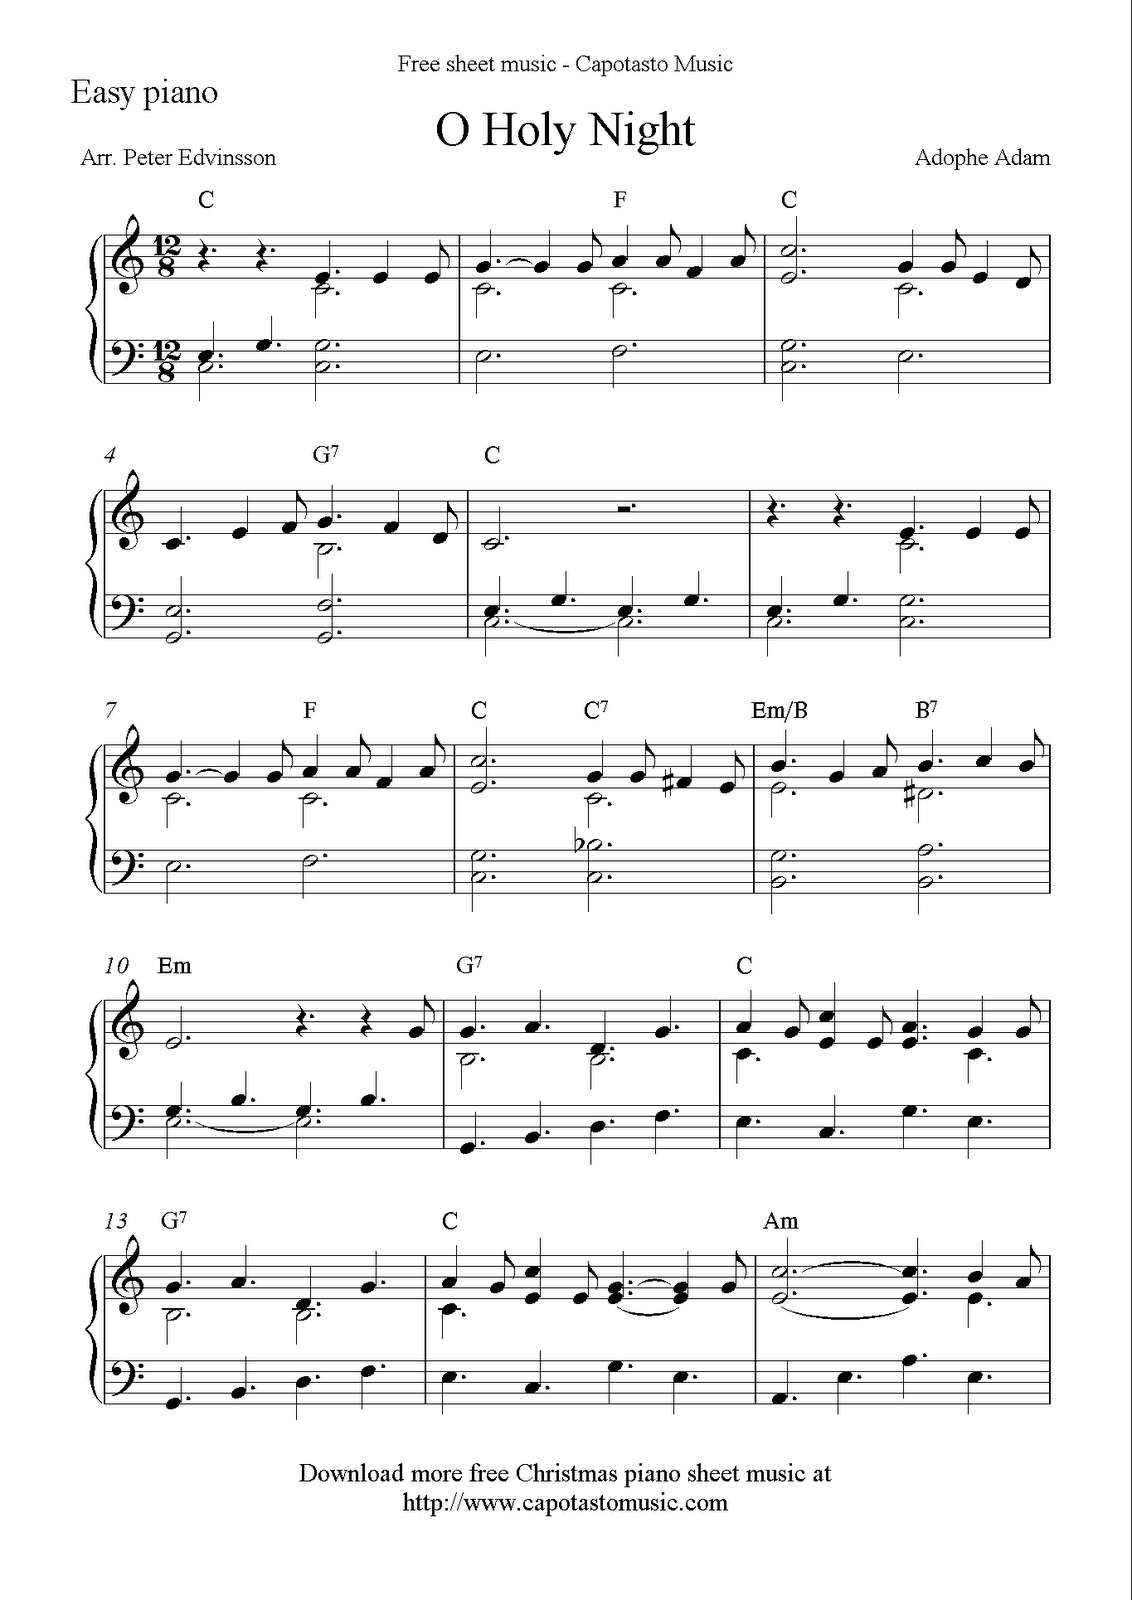 Festive Piano Sheet Music Play O Holy Night With These Free And Easy Christmas Scores - Free Christmas Piano Sheet Music For Beginners Printable